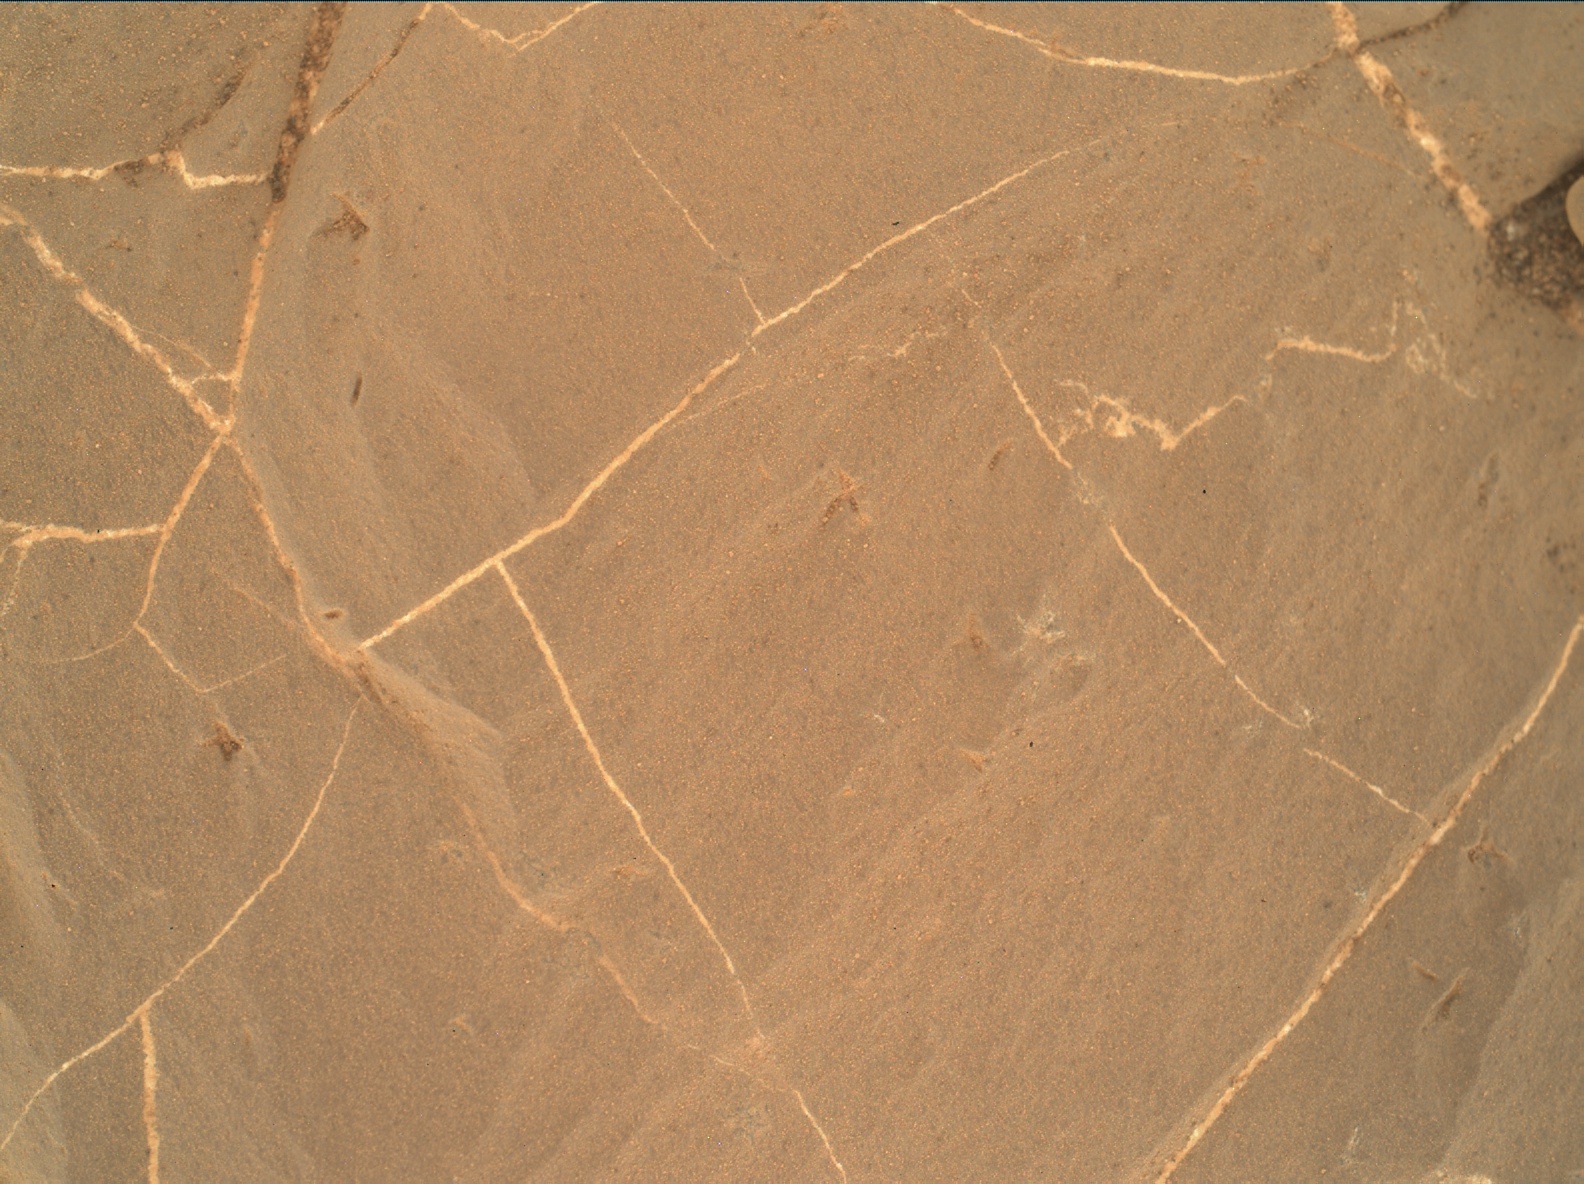 Nasa's Mars rover Curiosity acquired this image using its Mars Hand Lens Imager (MAHLI) on Sol 1993